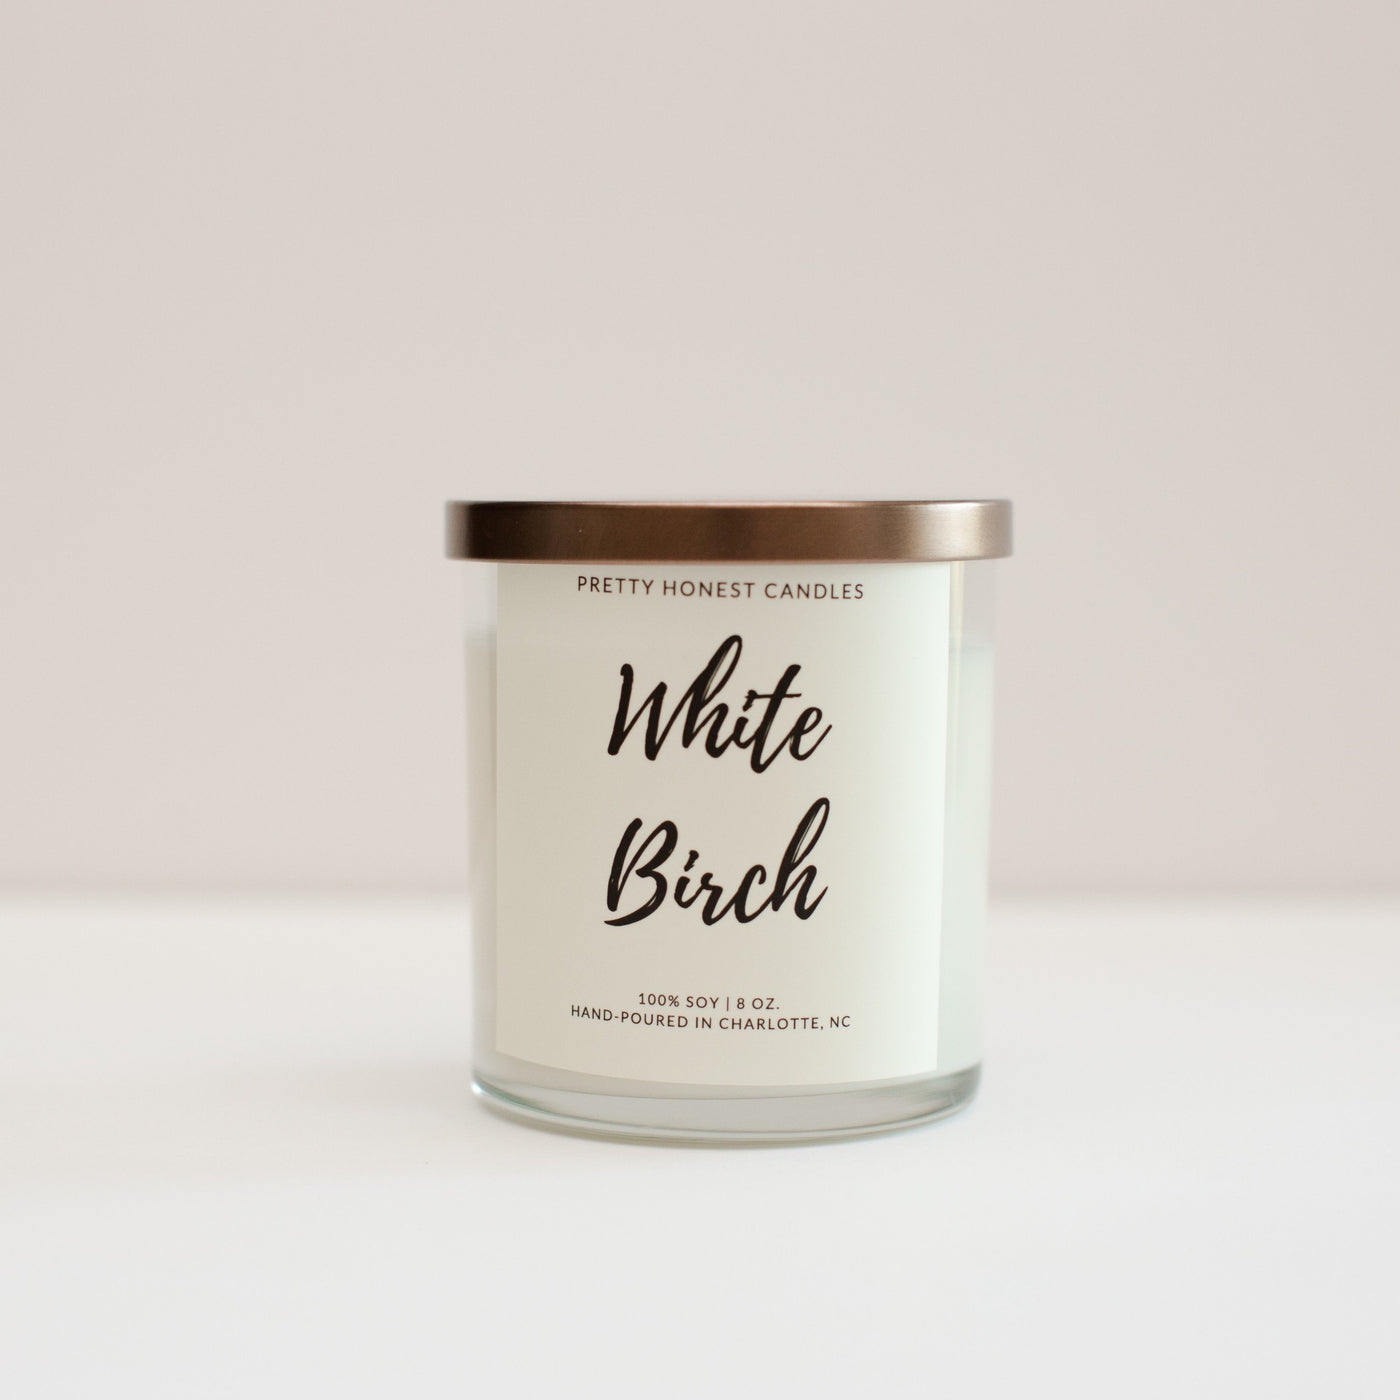 White Birch Soy Candle - Pretty Honest Candles